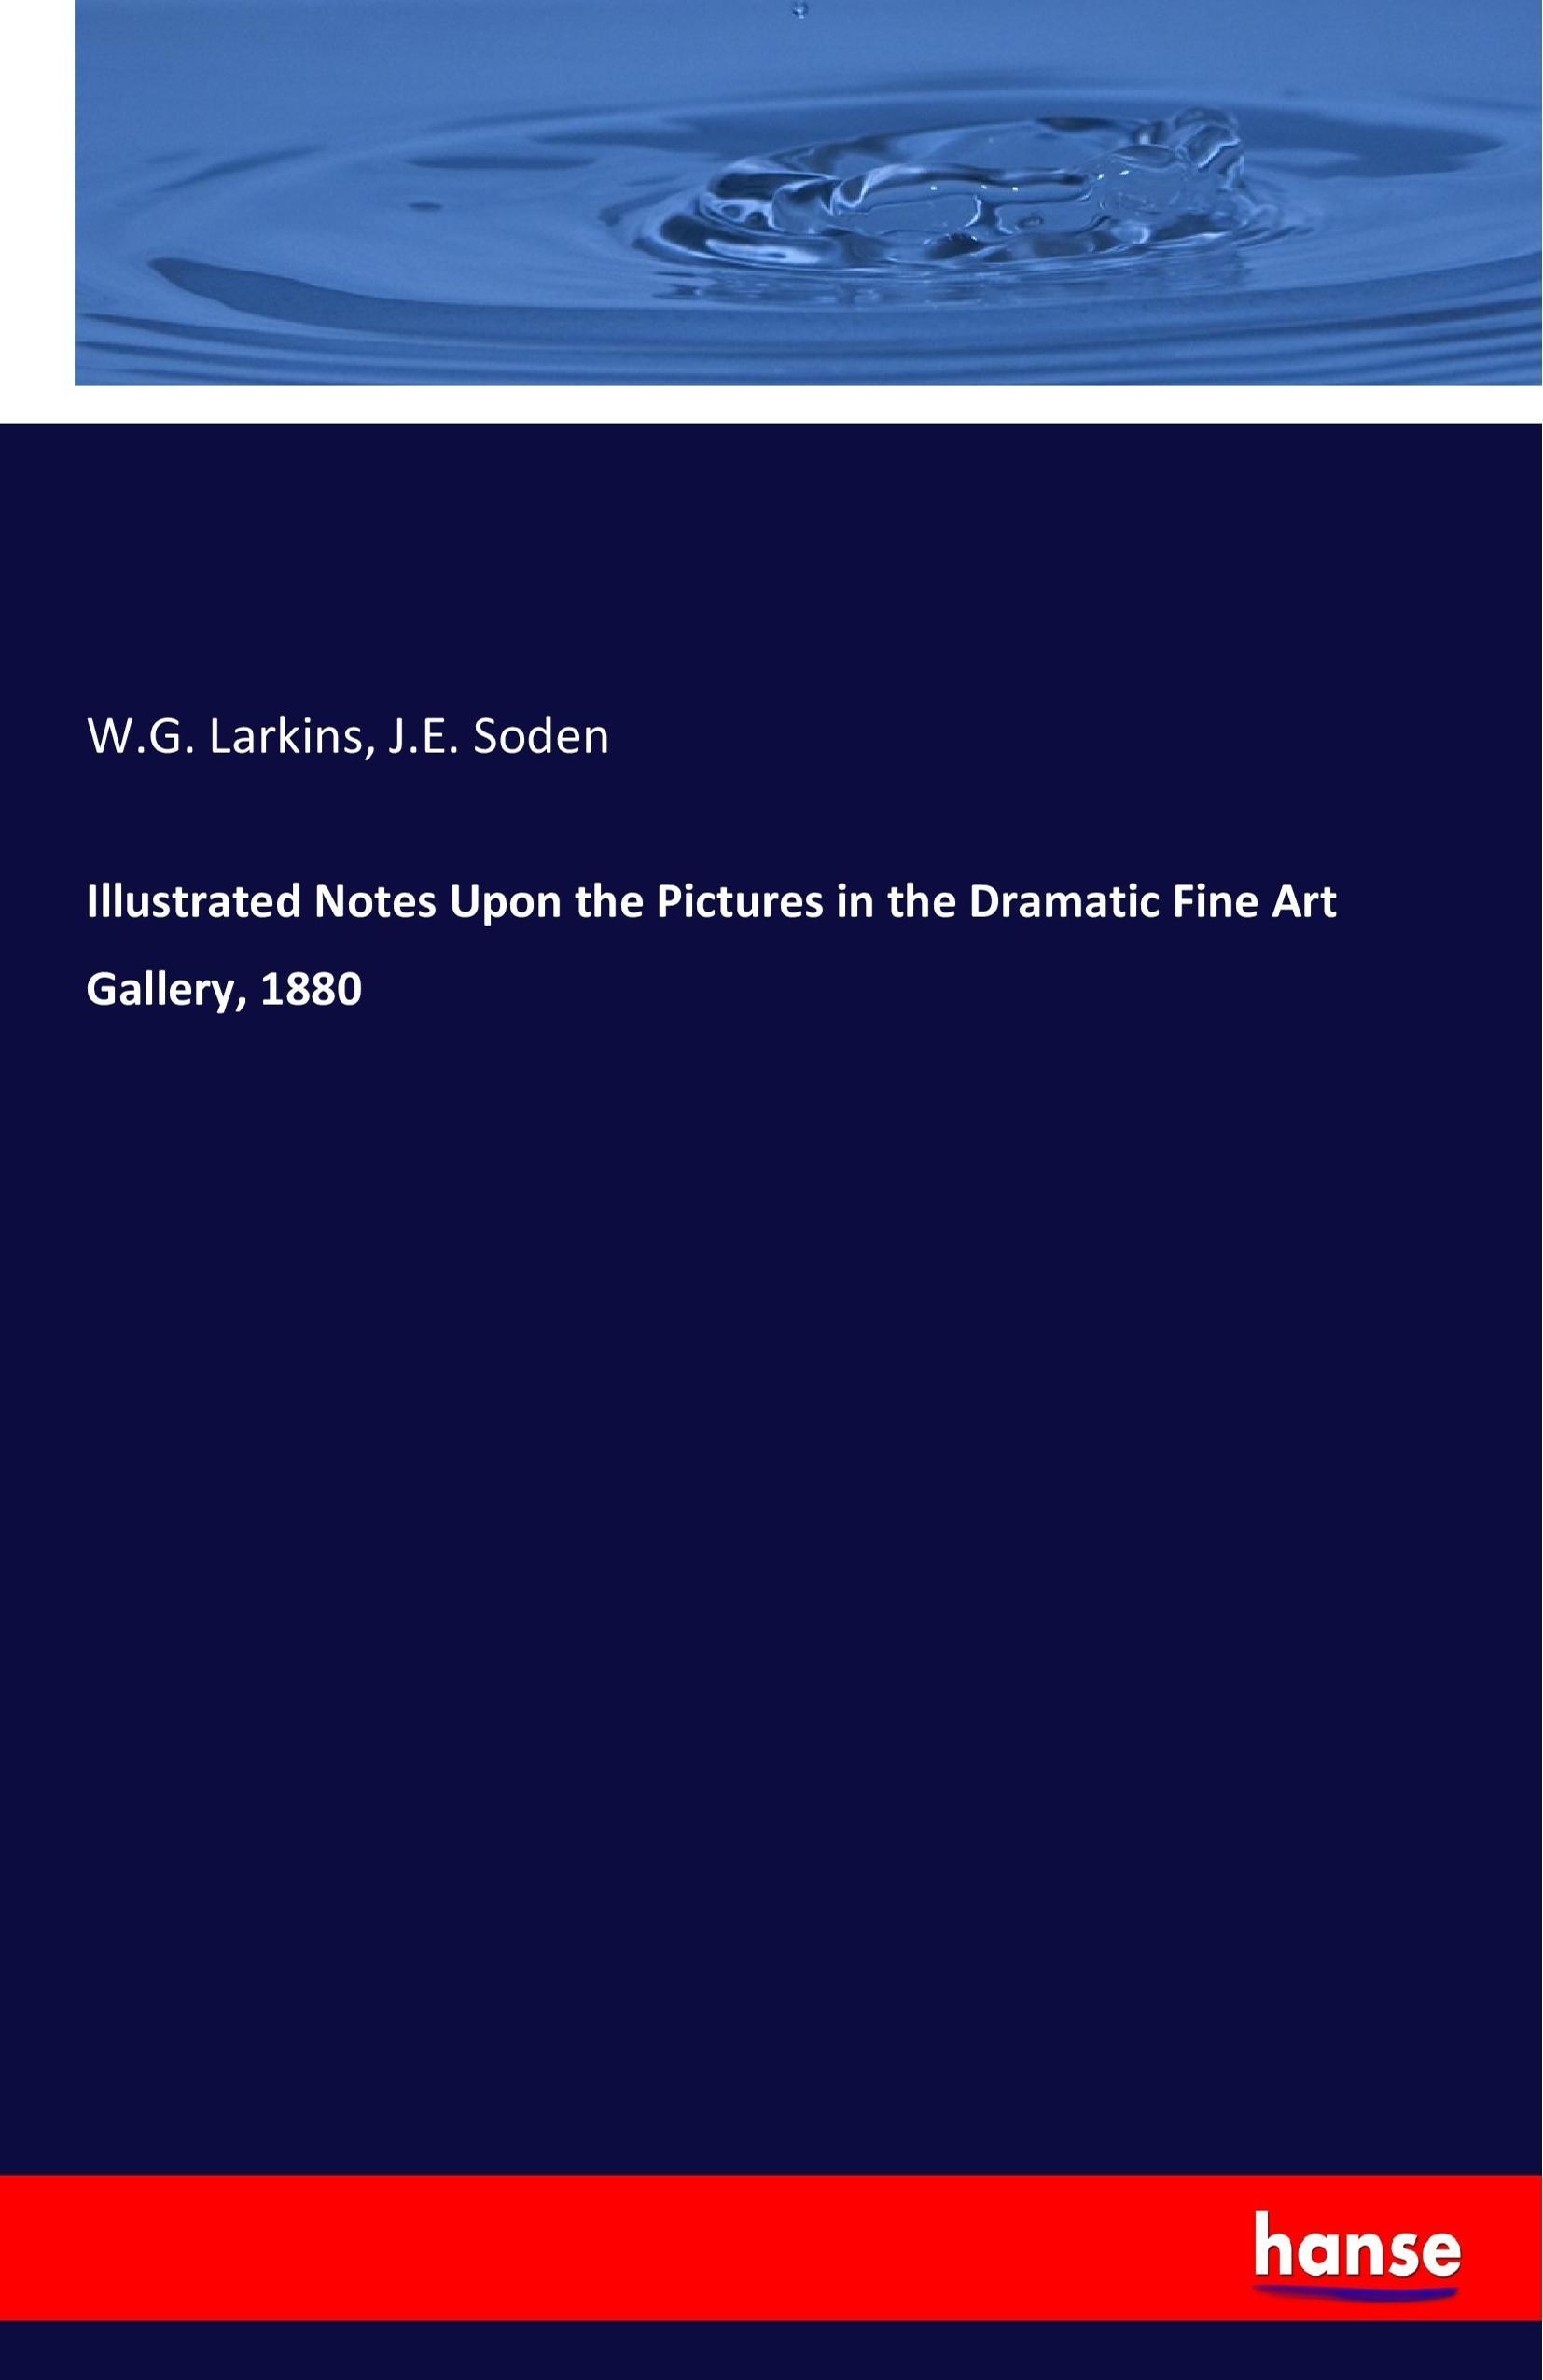 Illustrated Notes Upon the Pictures in the Dramatic Fine Art Gallery, 1880 - Larkins, W. G. Soden, J. E.